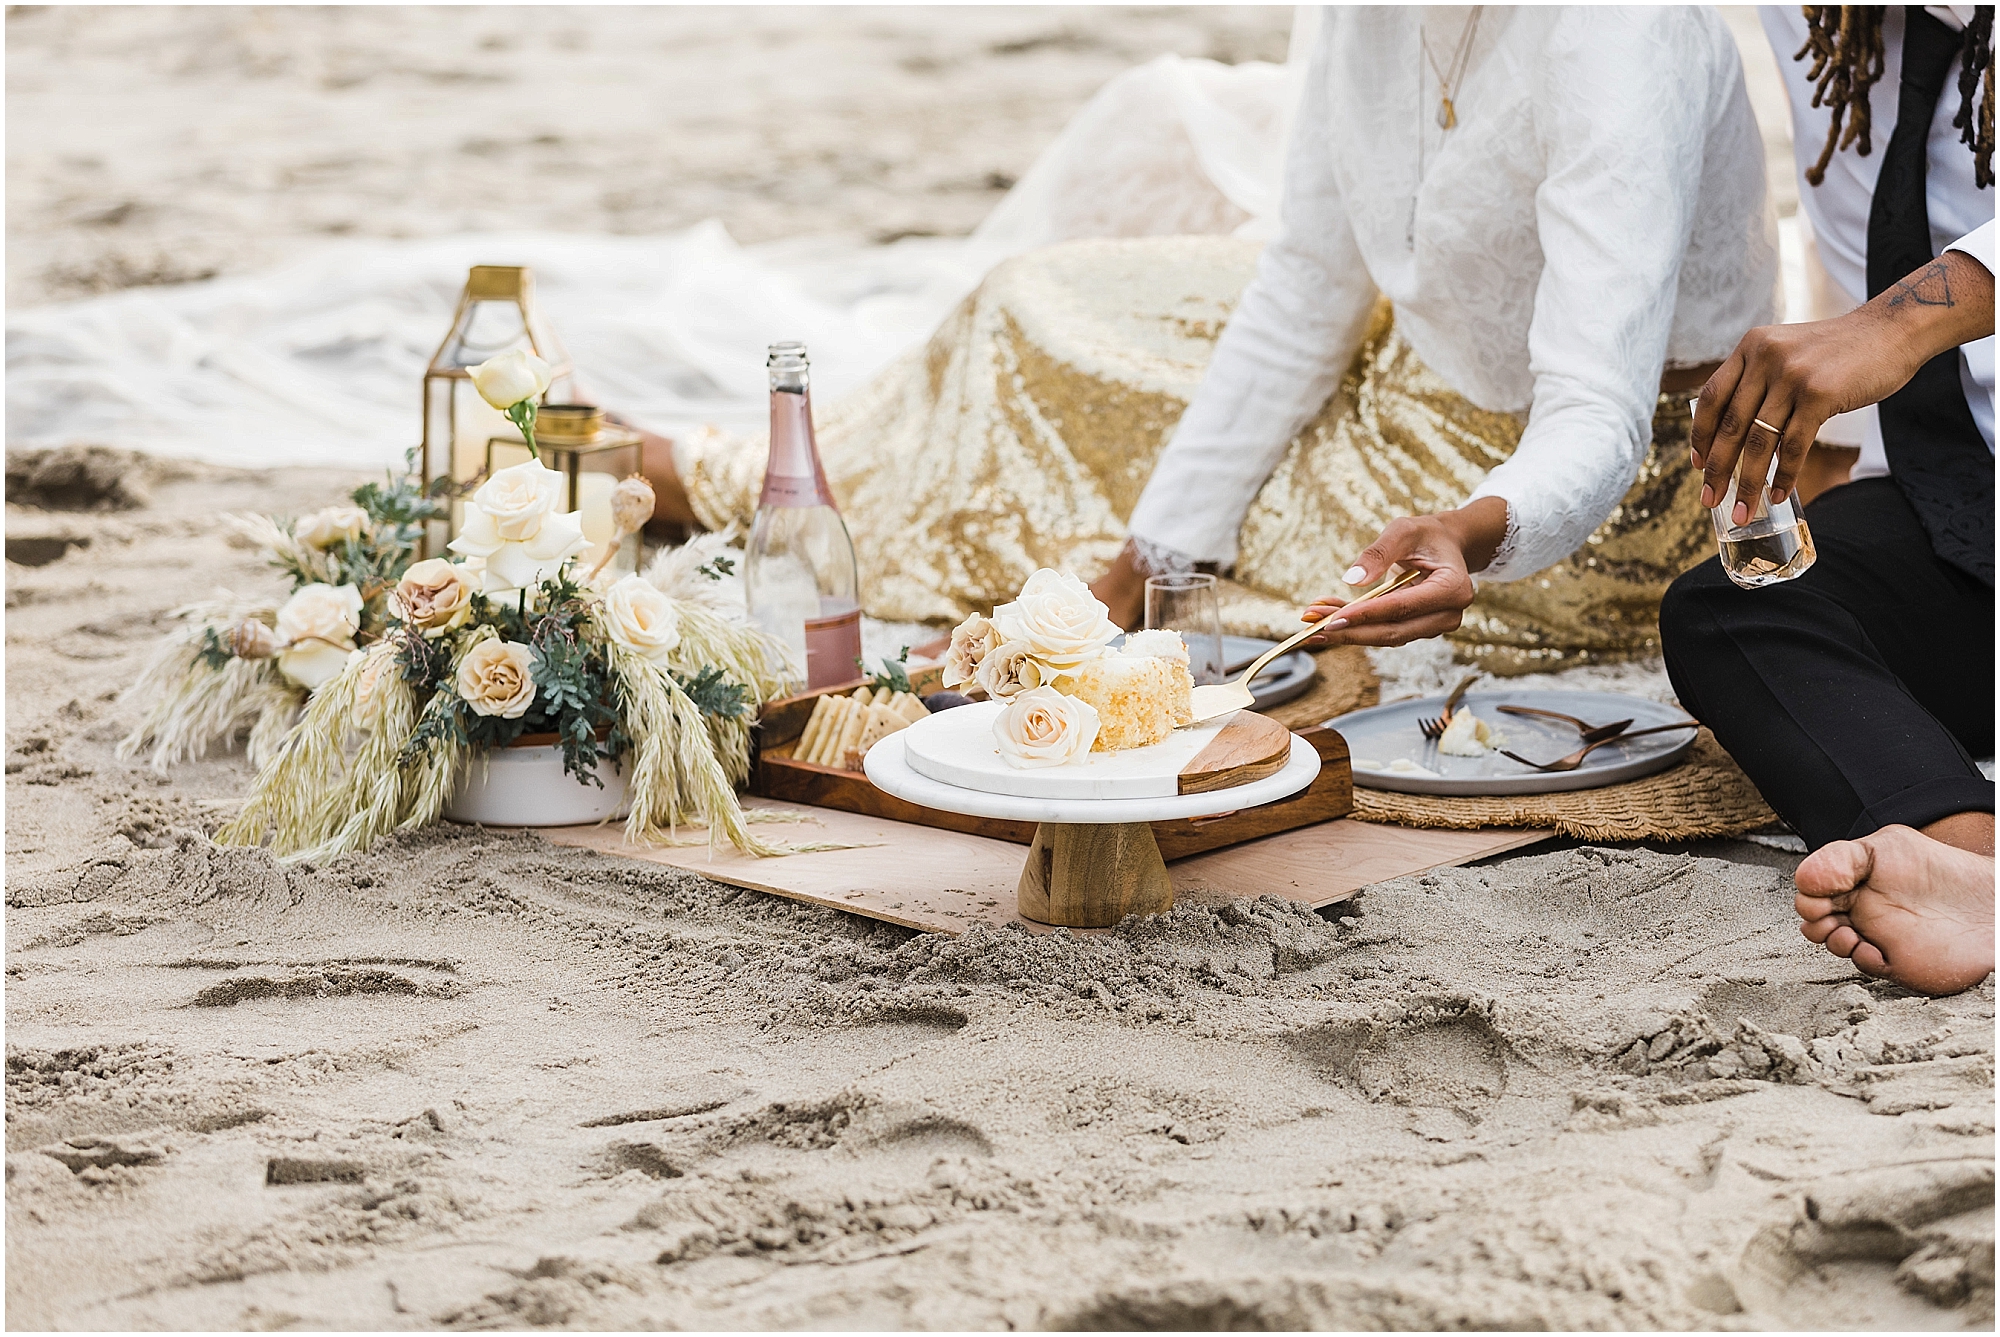 A couple cuts their wedding cake during their picnic on the beach after their intimate Oregon Coast elopement ceremony near Lincoln City. | Erica Swantek Photography